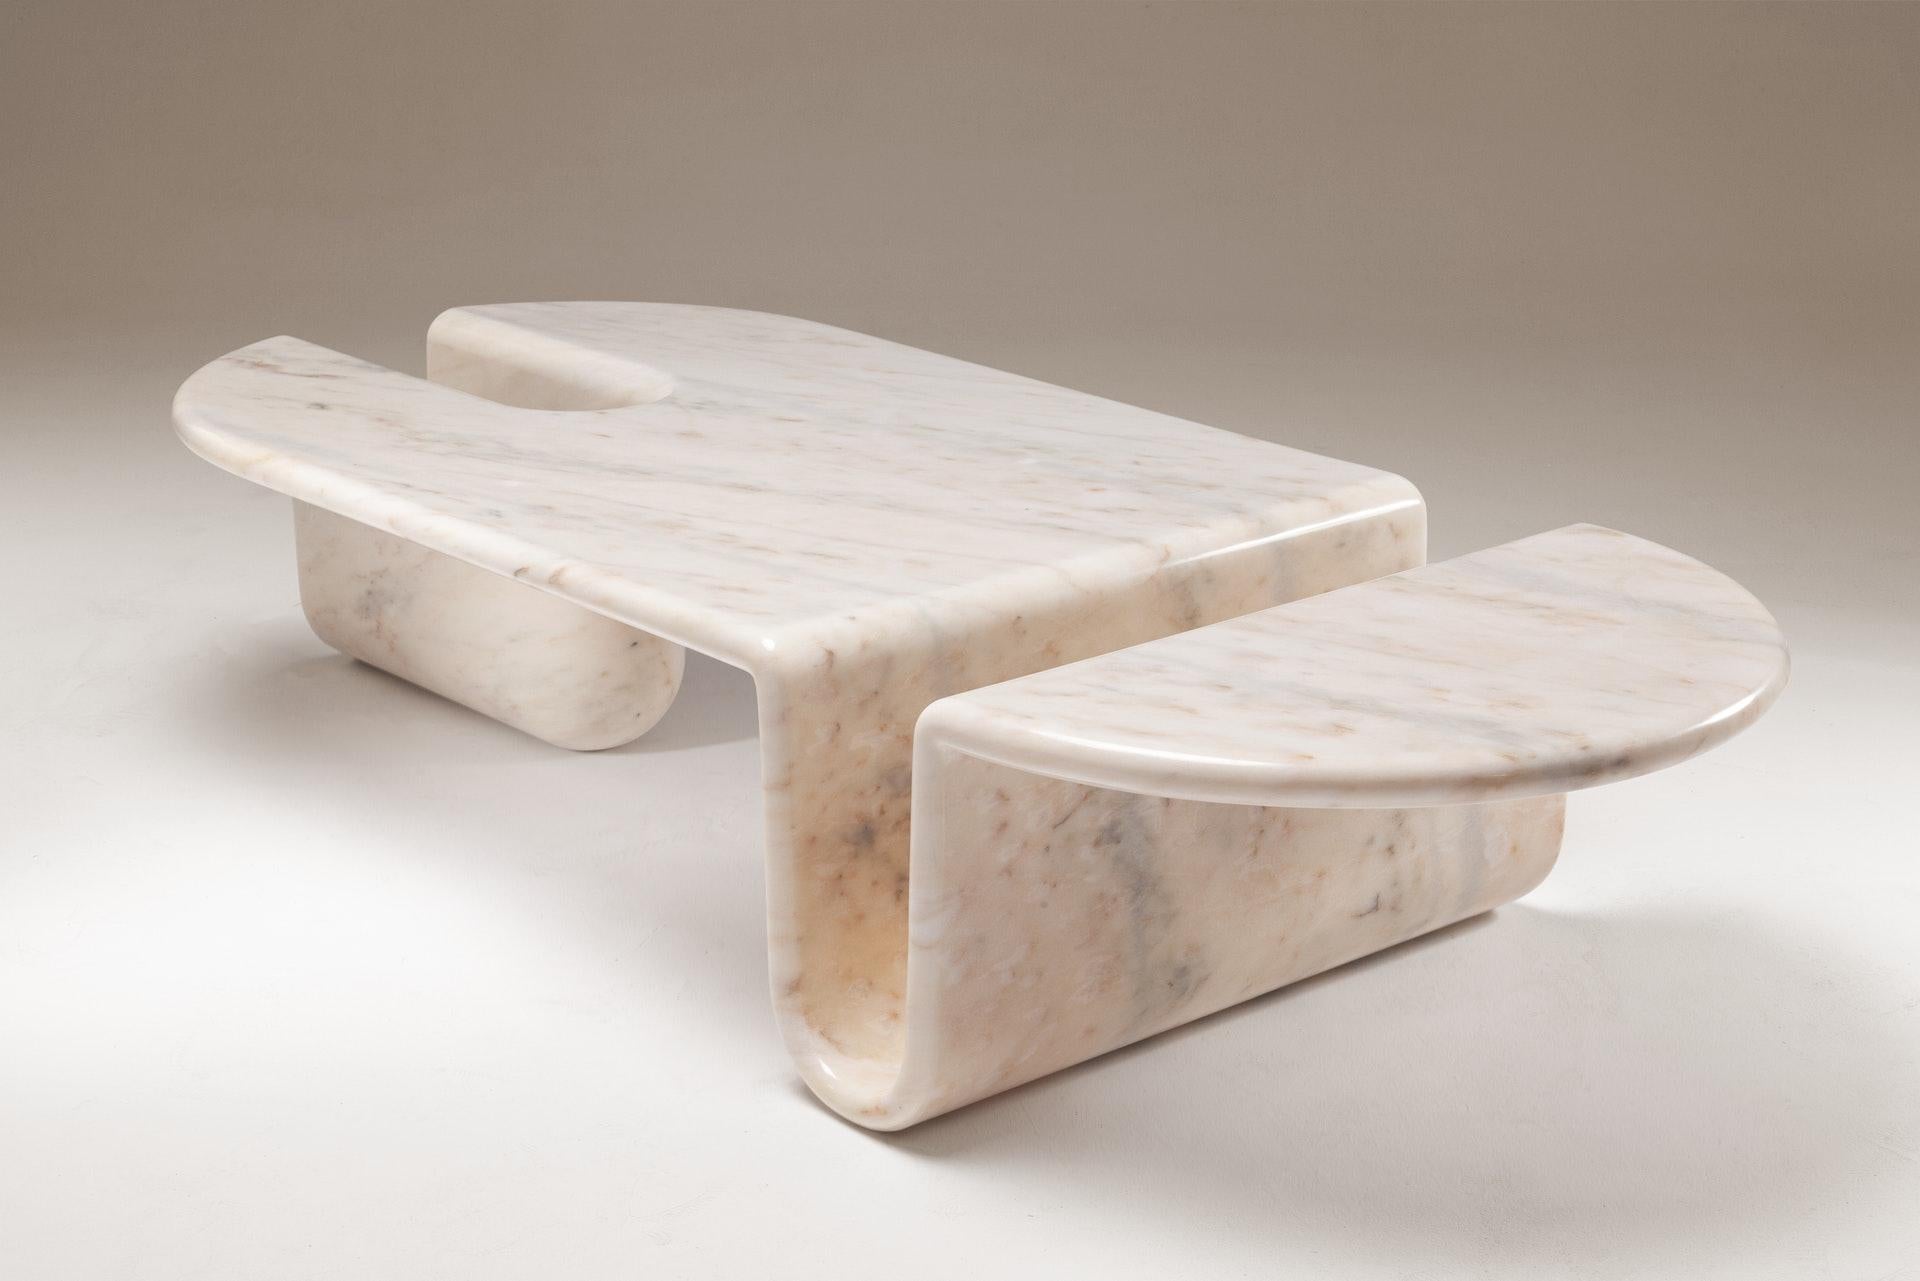 Coffee or center table carved from a solid block of Estremoz white marble, a sculptural piece that is hand polished to the finest detail. Made to Order.

Sensual curves and straight lines embody the perfect combination of beauty and danger, much